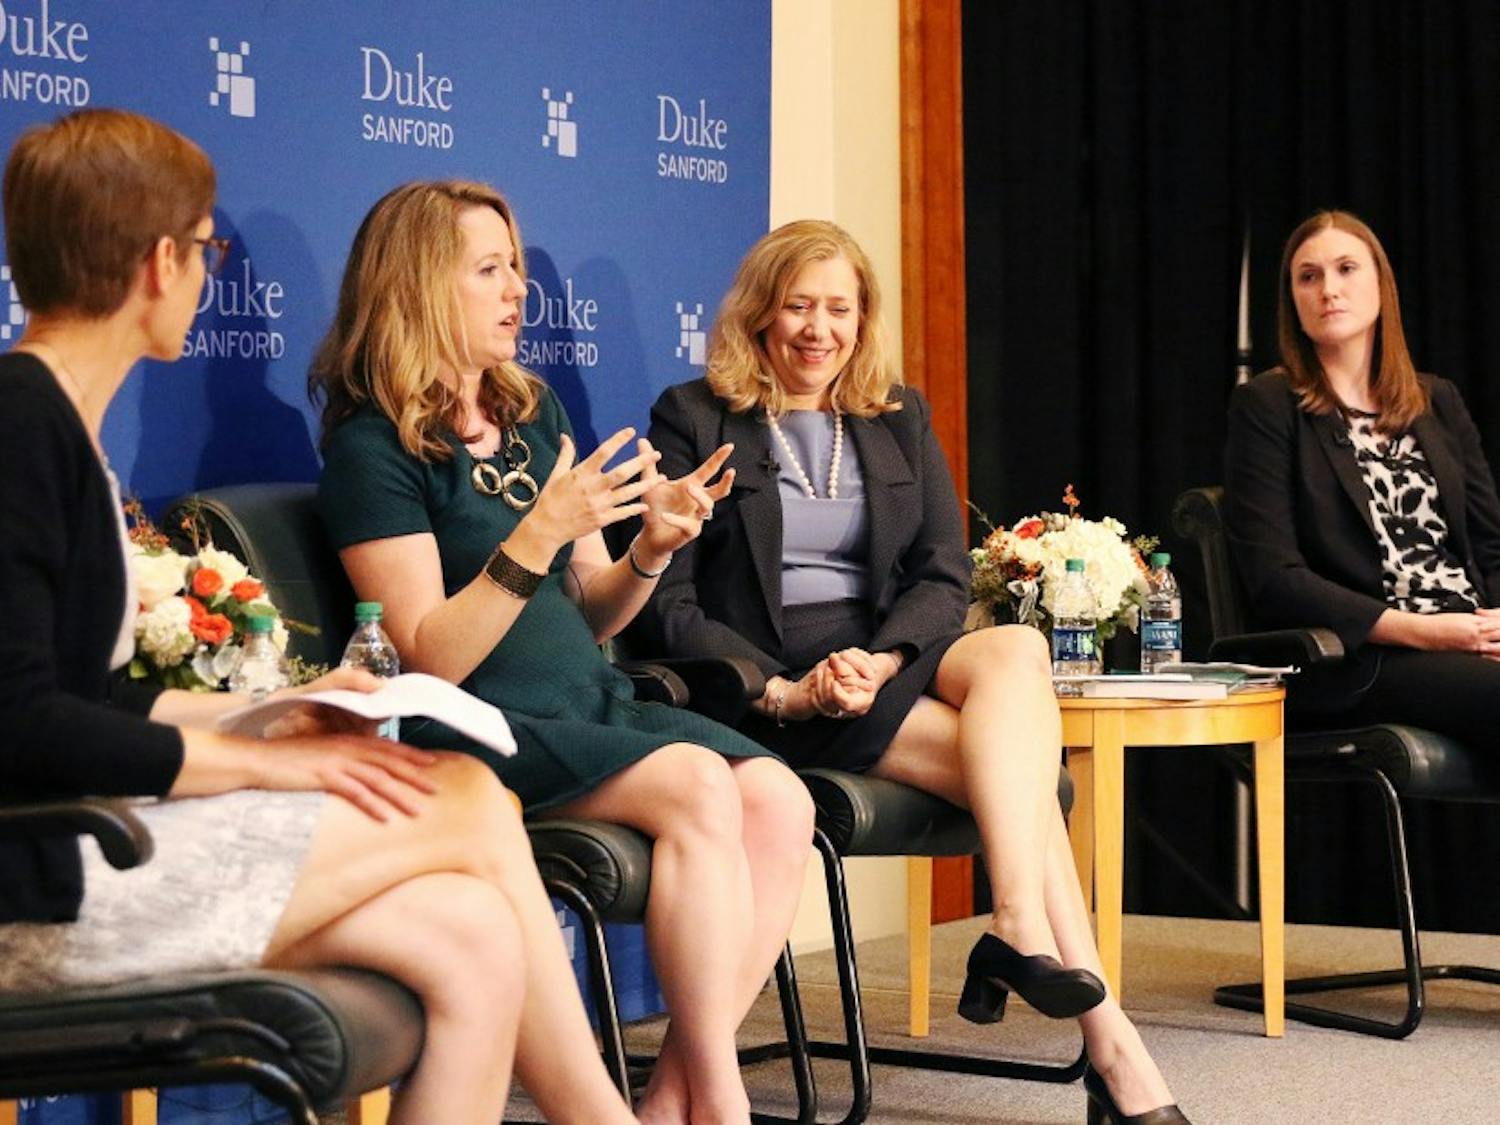 Professor Judith Kelley moderated a discussion among three high-ranking Duke women about human trafficking.